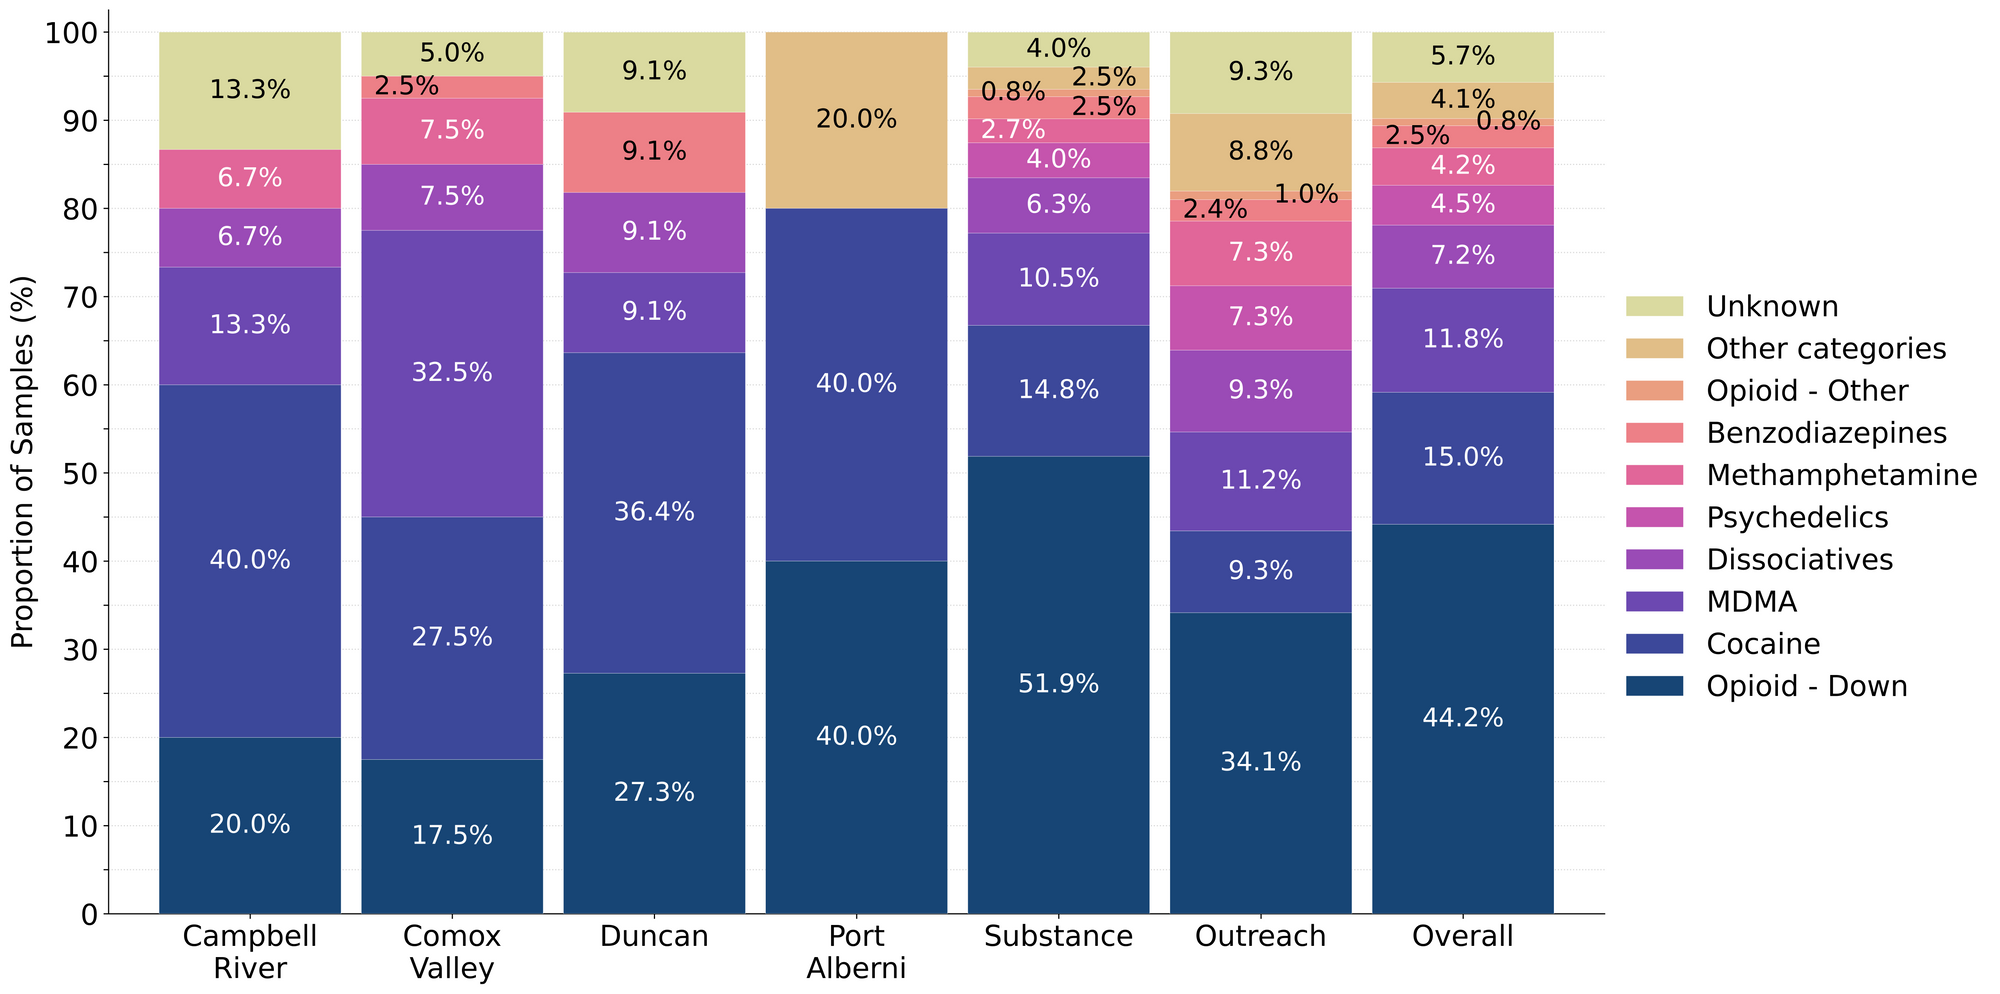 Figure 1. Prevalence of drug classes checked during August split by sample collection/method. Bars are stacked by the percentage of samples in each drug class, with the individual sample counts overlaid.